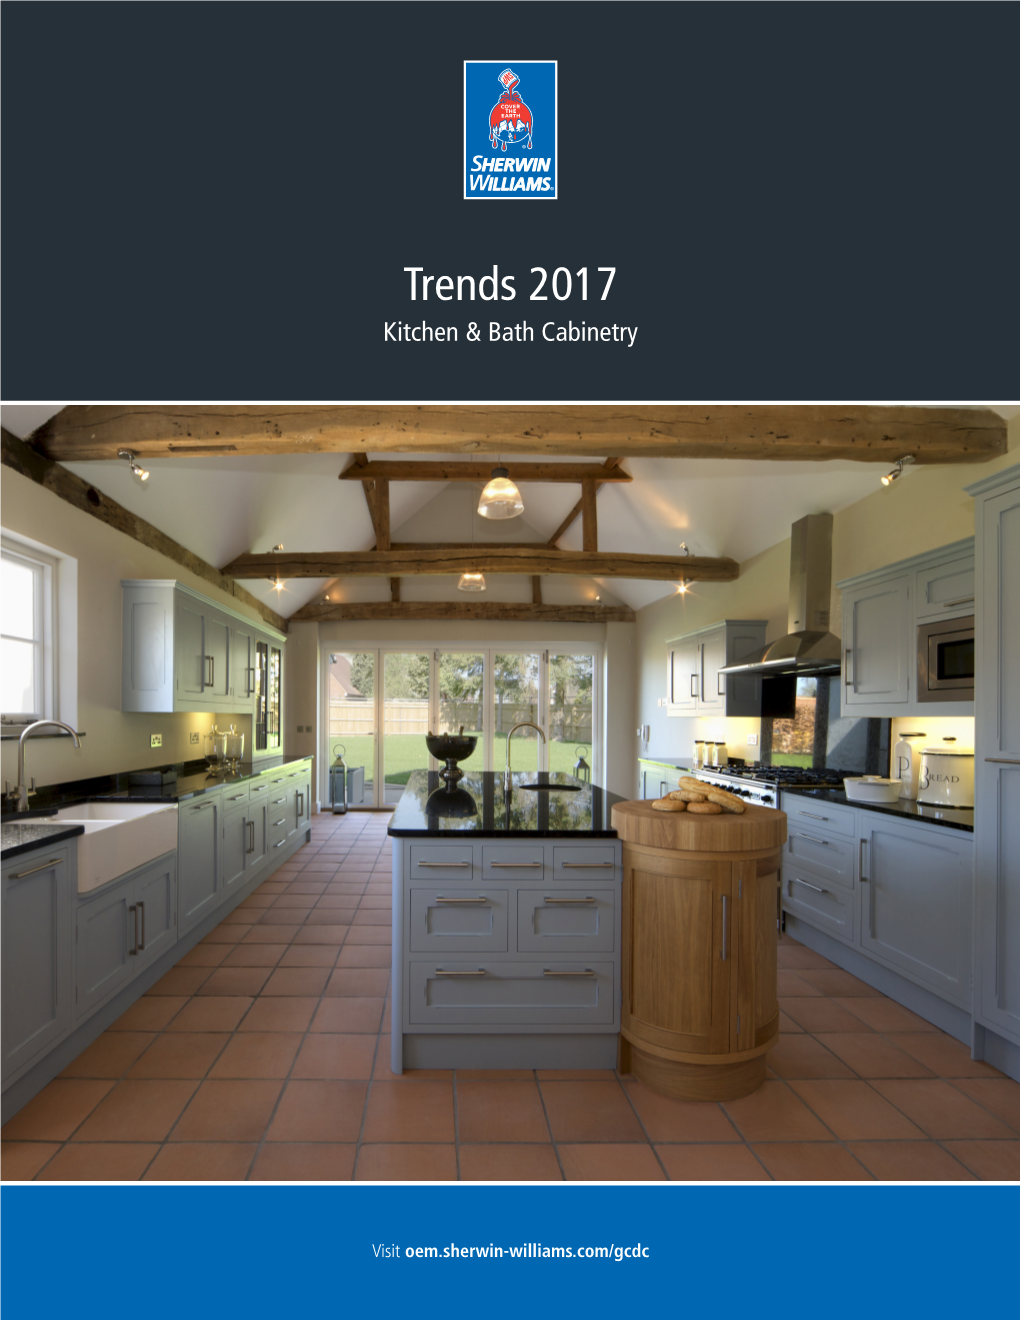 Trends 2017 Kitchen & Bath Cabinetry